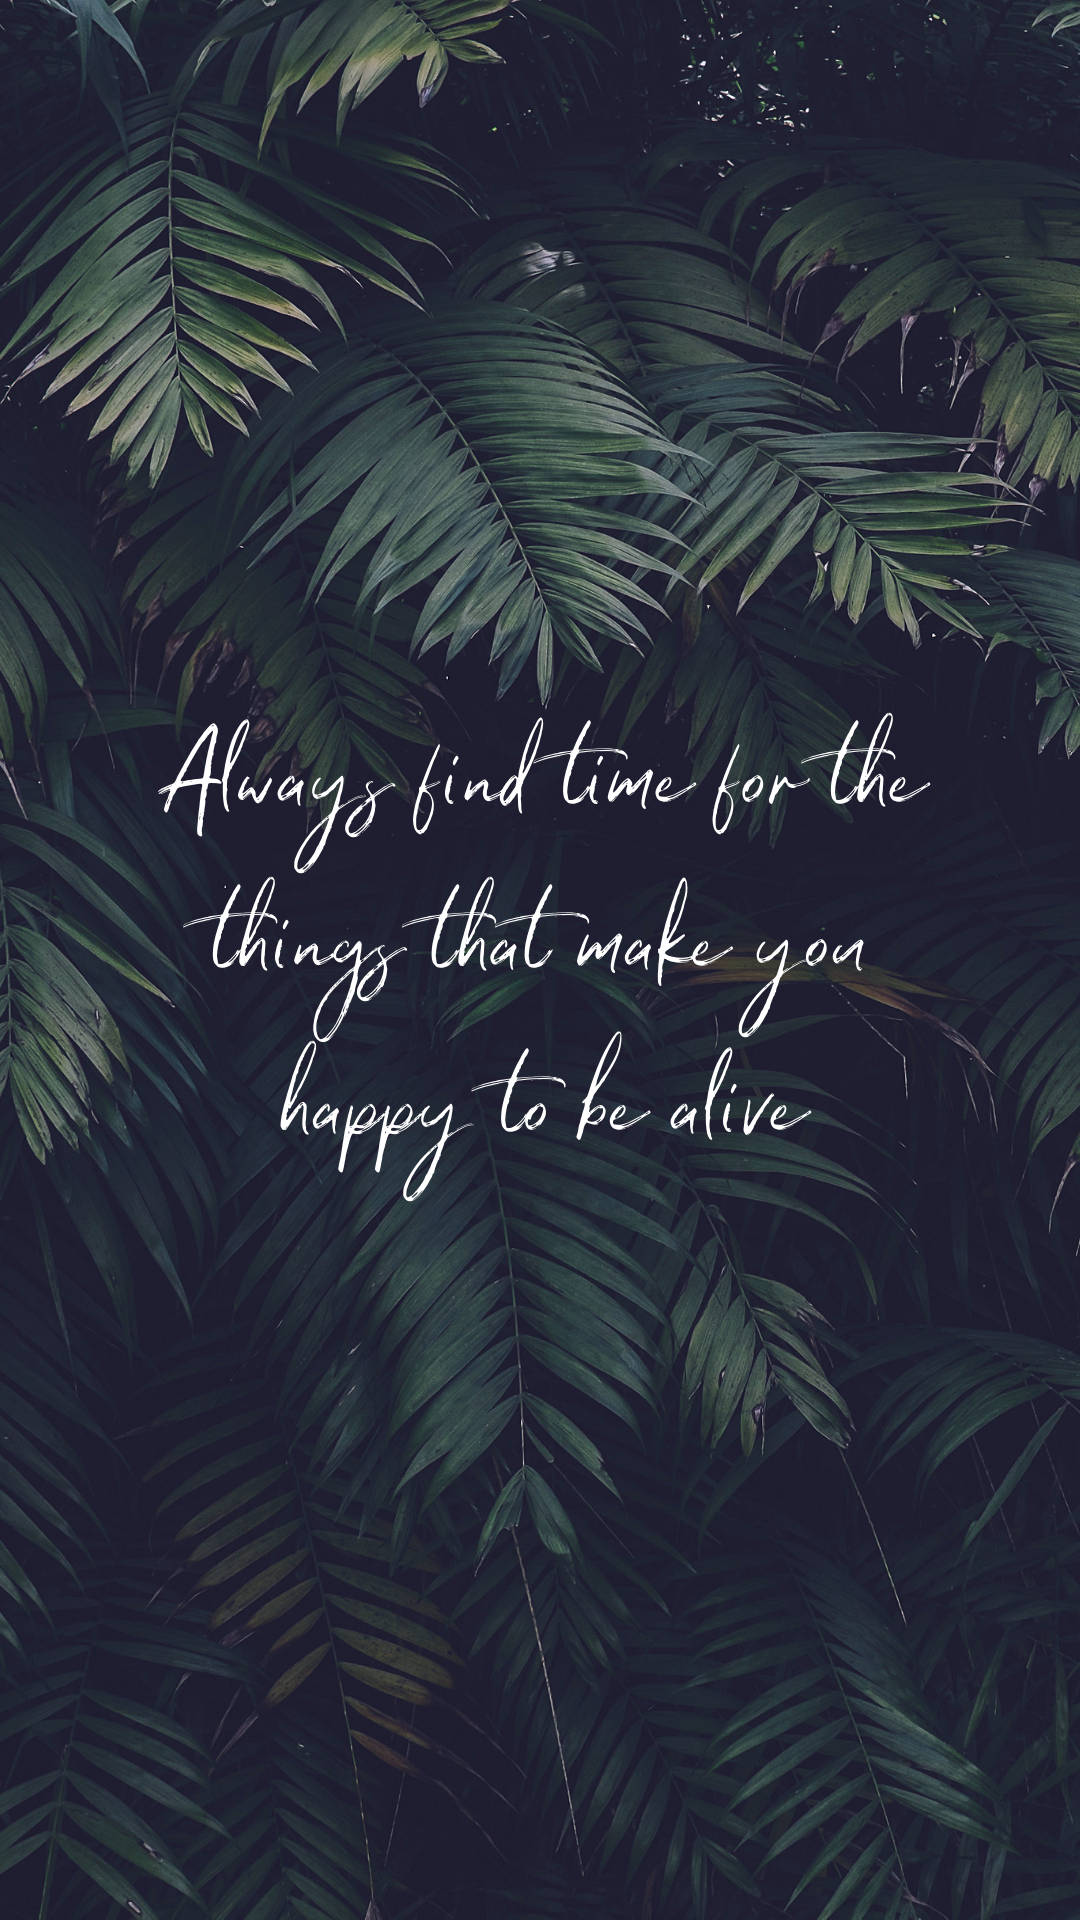 Aesthetic Inspirational Quote Pastel Wallpaper for Iphone Your life Iphone wallpaper quotes inspirational Inspirational phone wallpaper Ipad wallpaper quotes